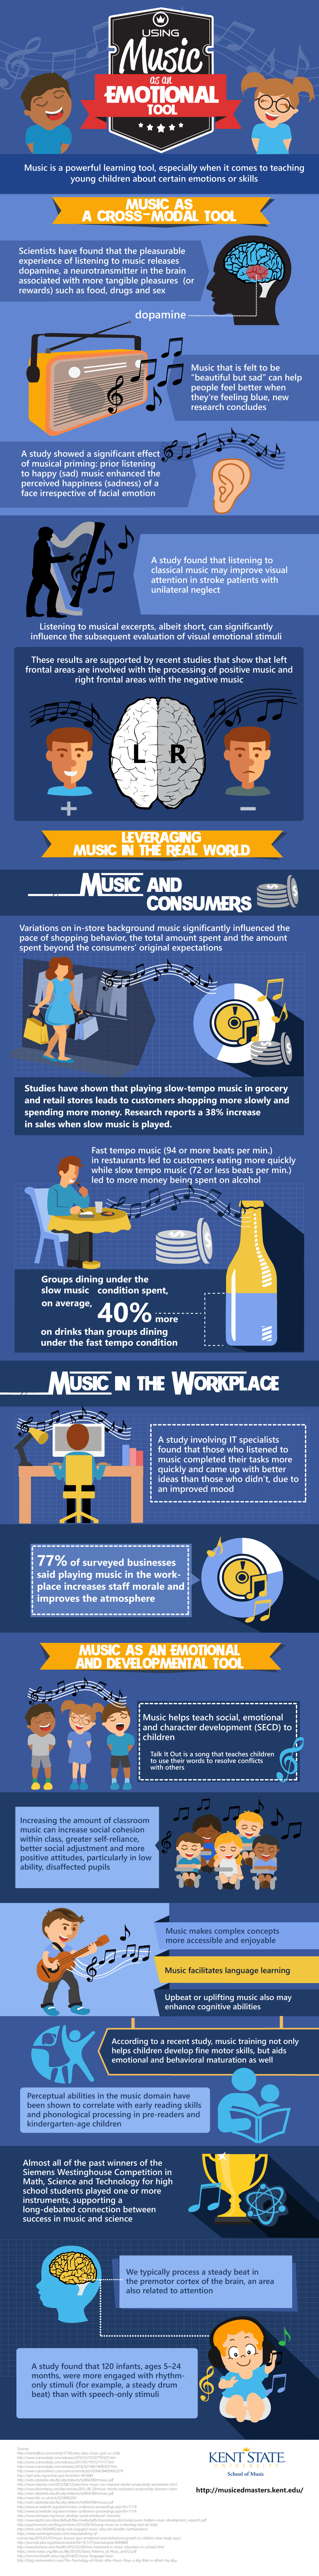  Did you lot know that music facilitates comprehension of complex concepts Learn And Watch An Interesting Infographic Explaining How Music Positively Impacts Learning